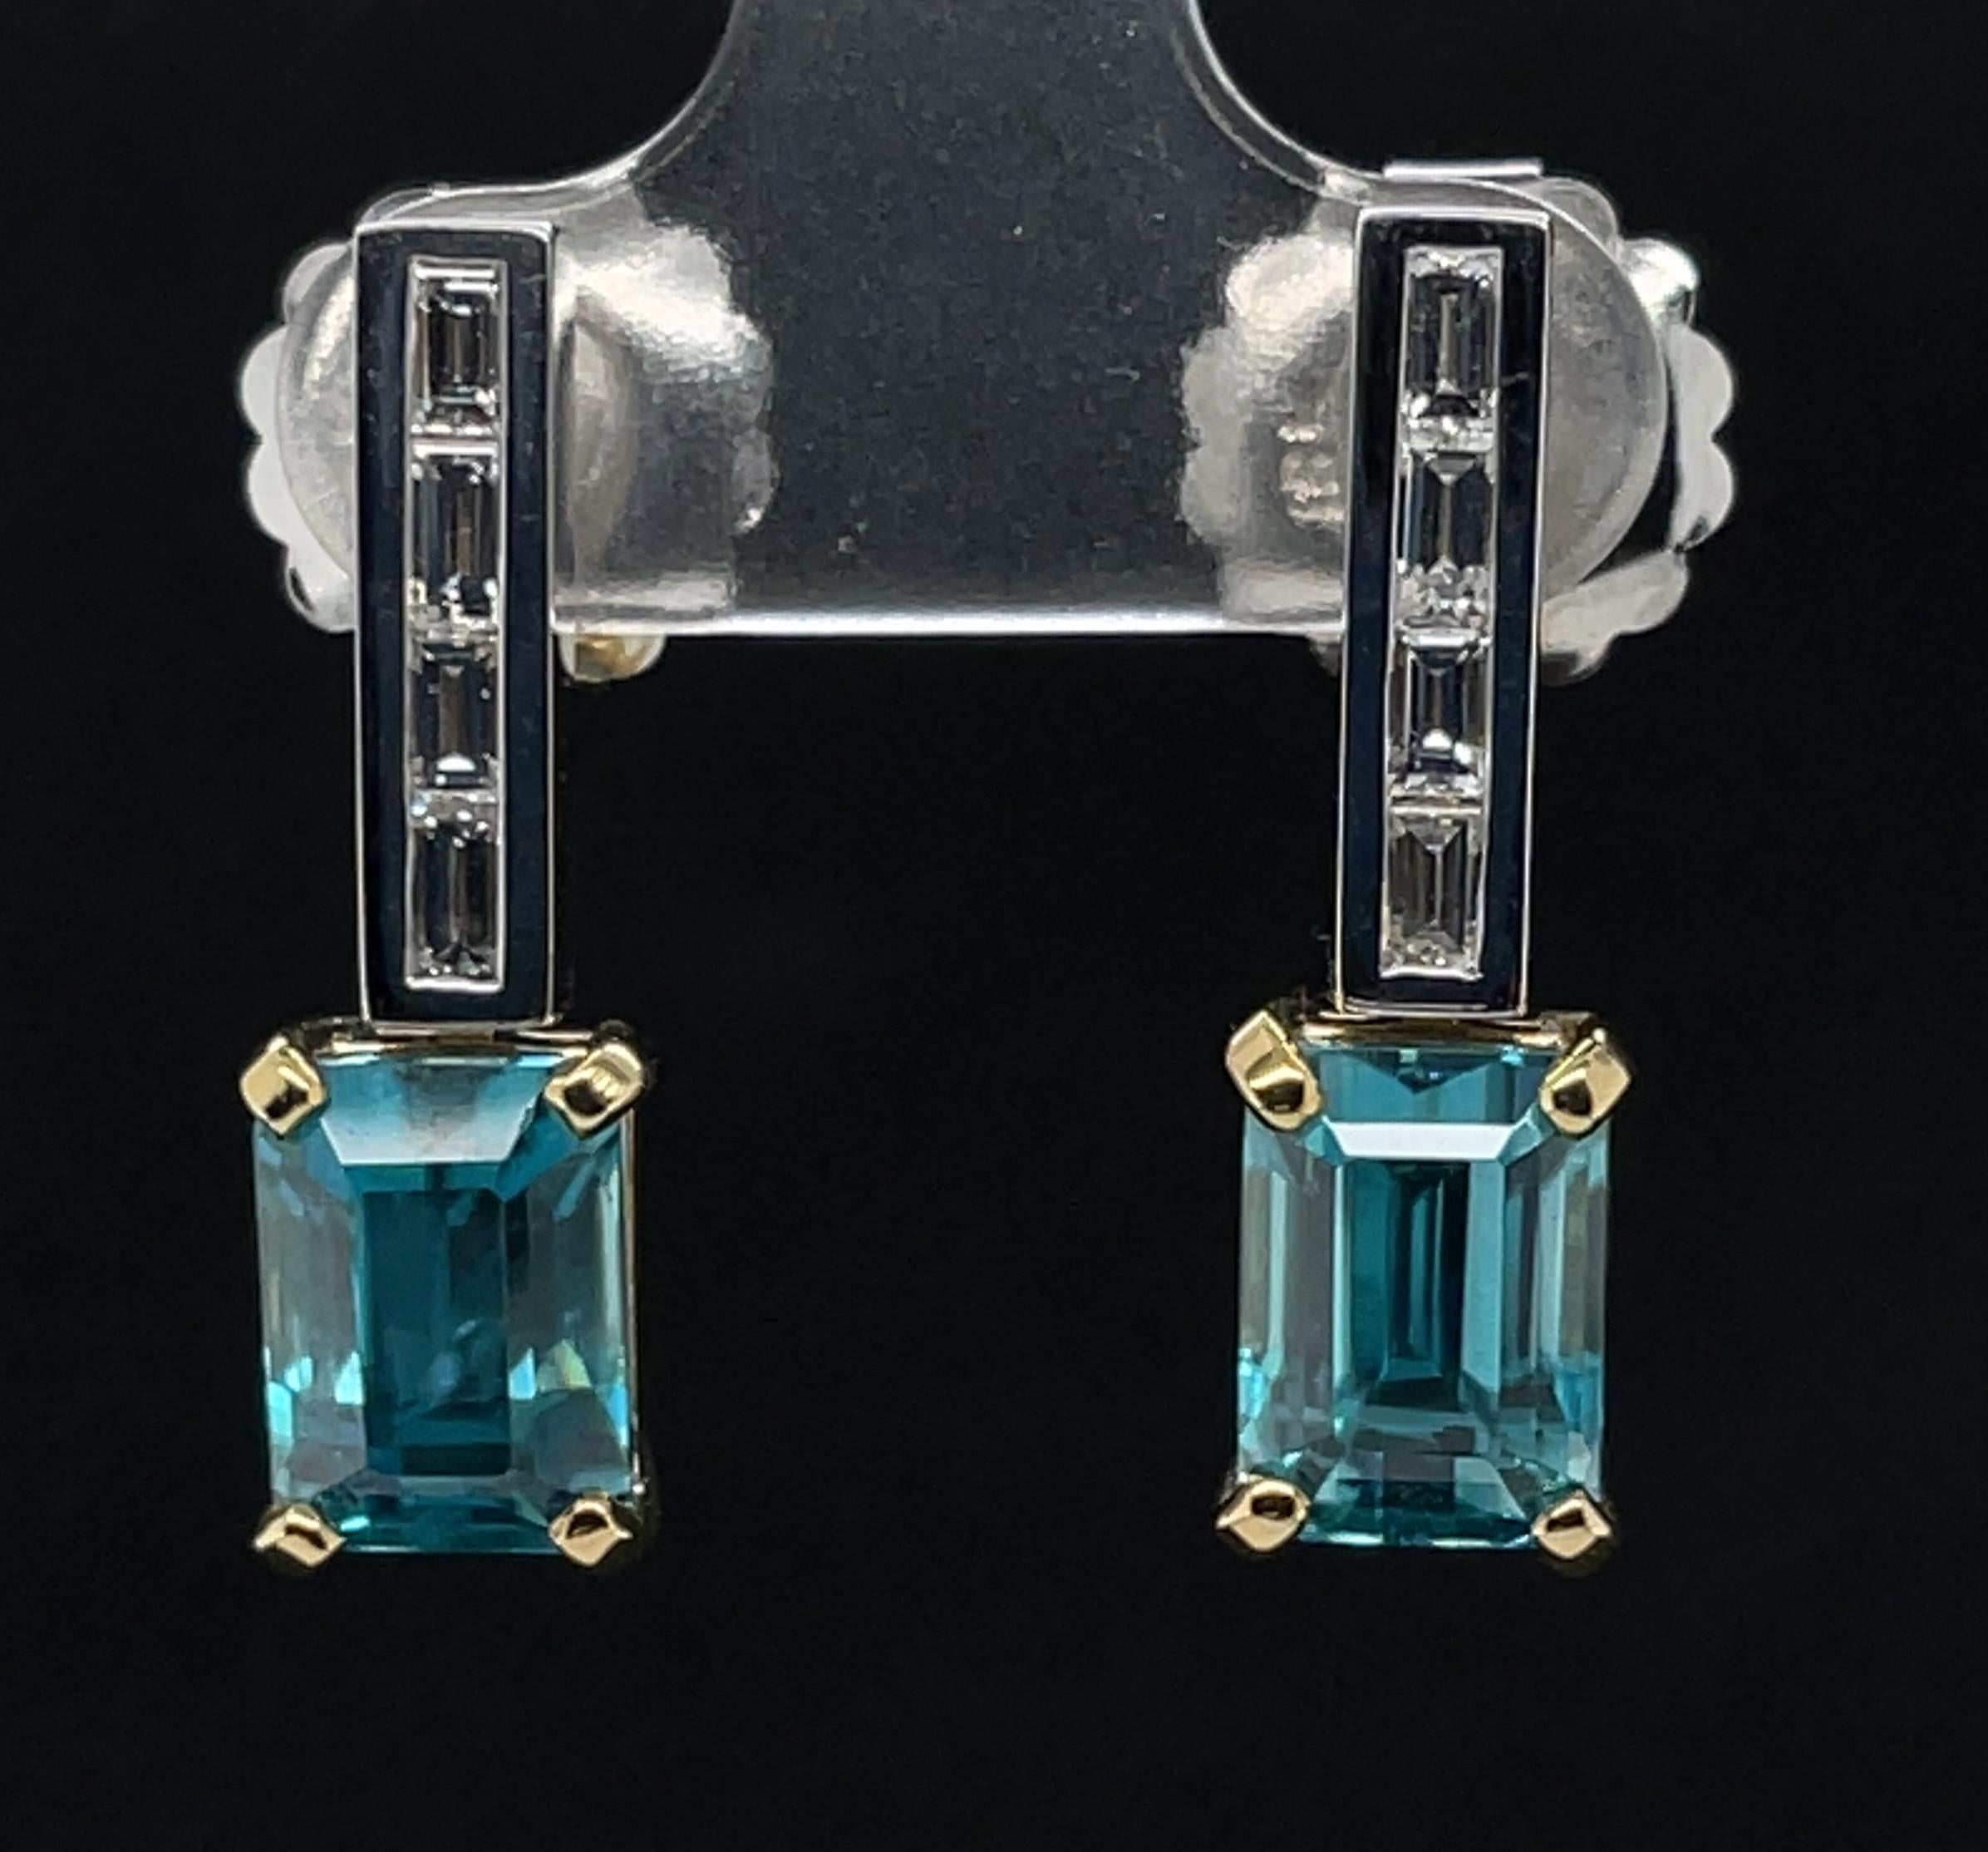 Blue Zircon and Diamond Drop Earrings in 18k White Gold, 9.97 Carats Total For Sale 1